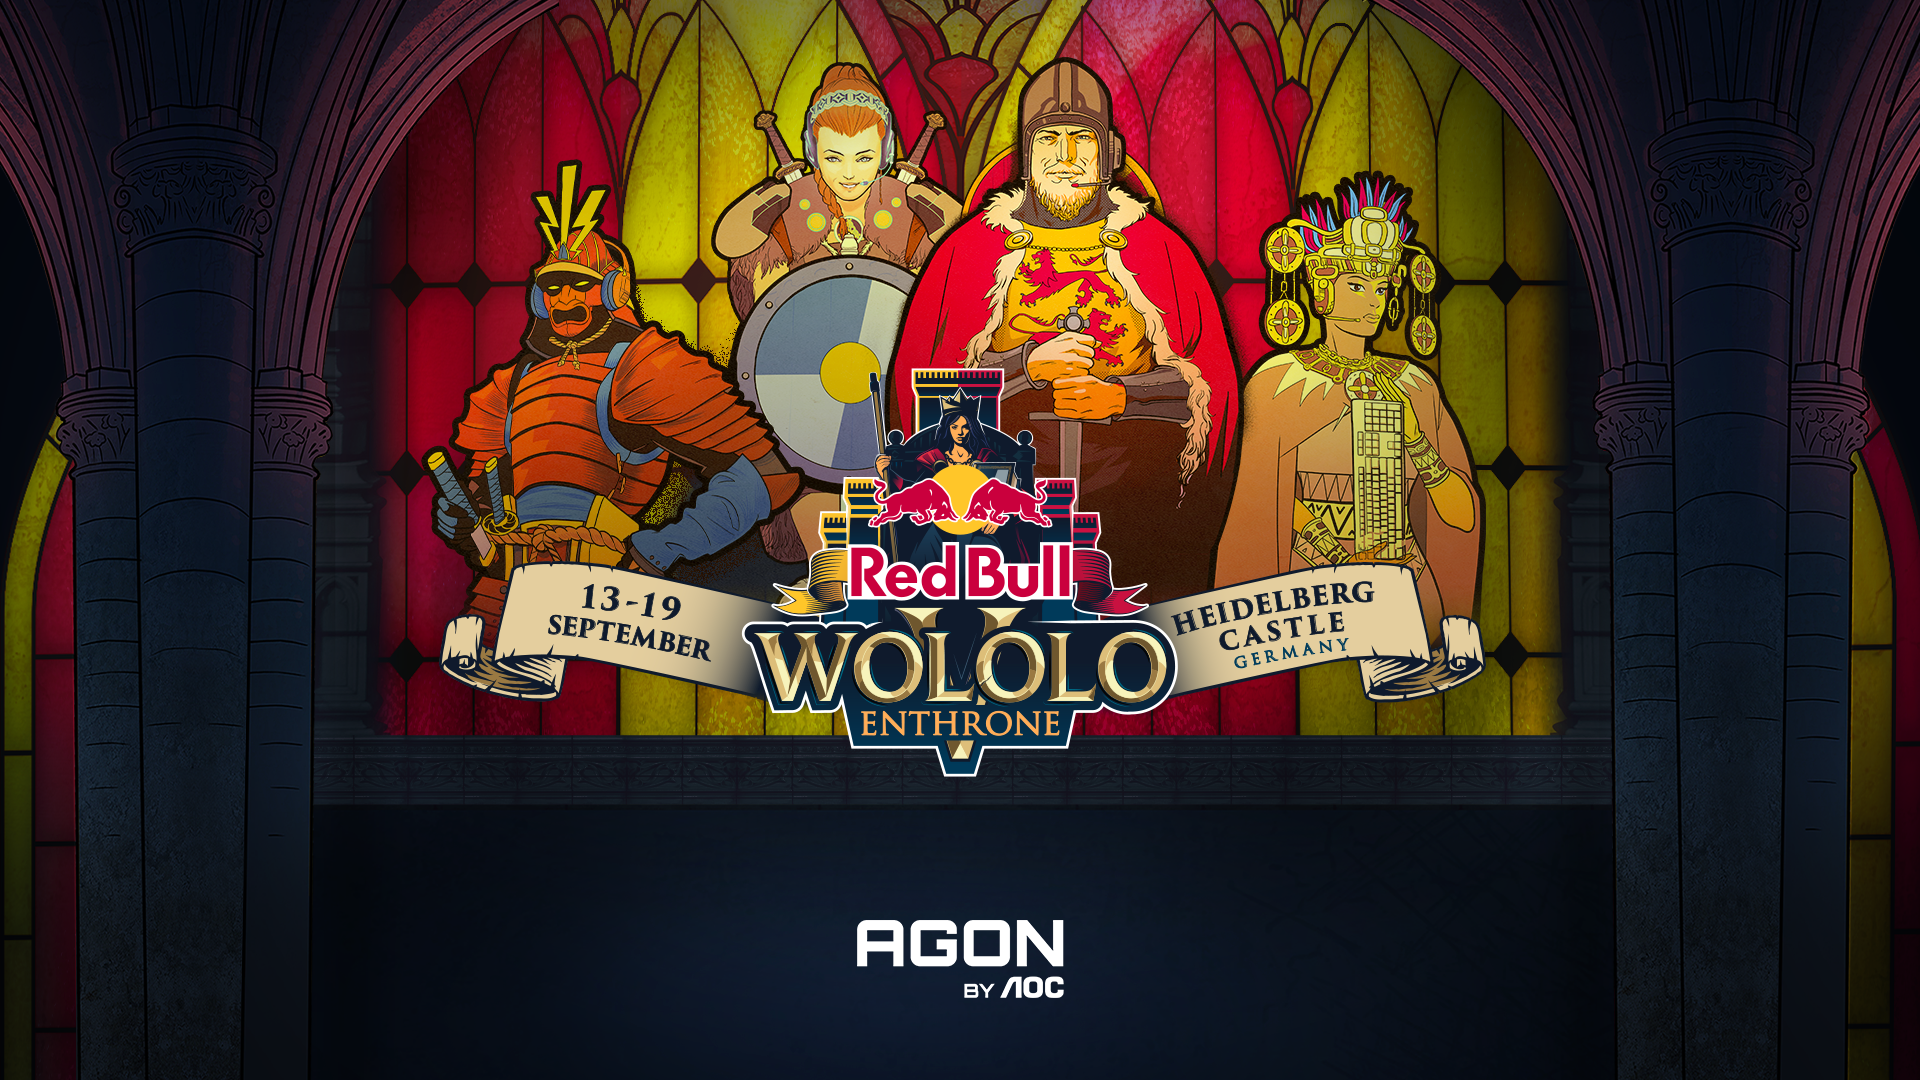 Red Bull WololoV_16x9_SCROLL TEXT INCLUDED.png